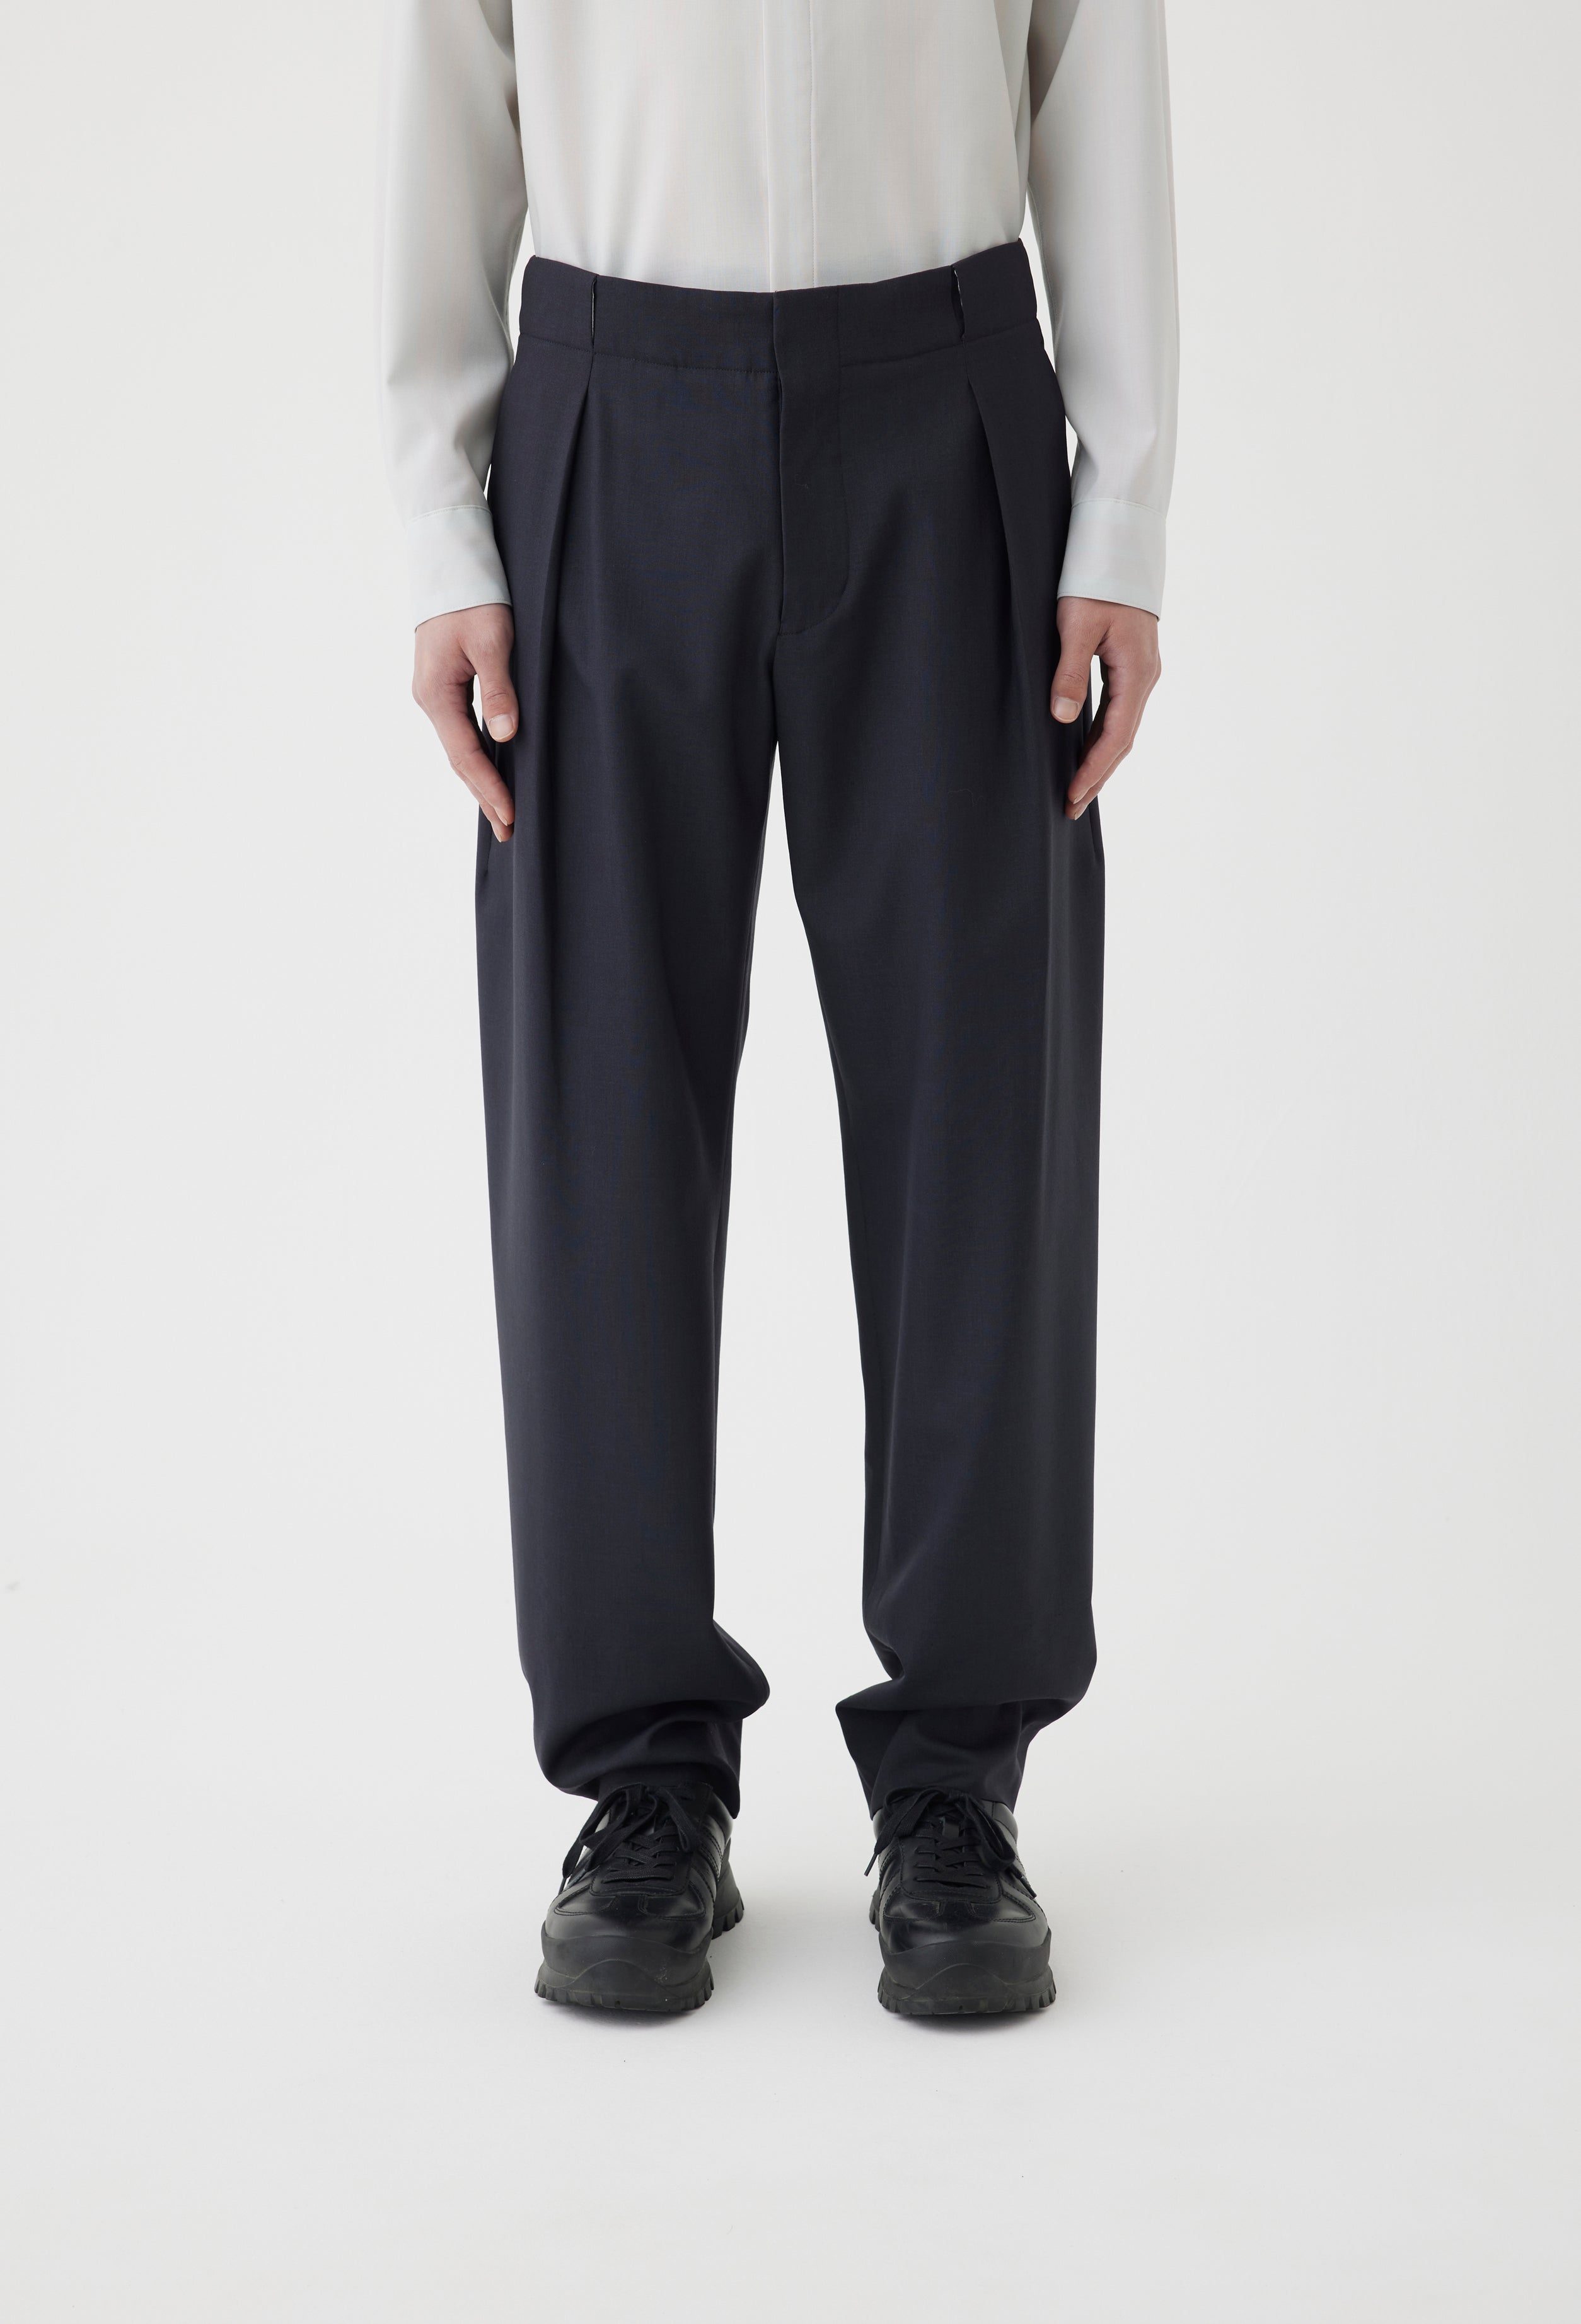 Tropical Wool Pleated Trouser in Charcoal